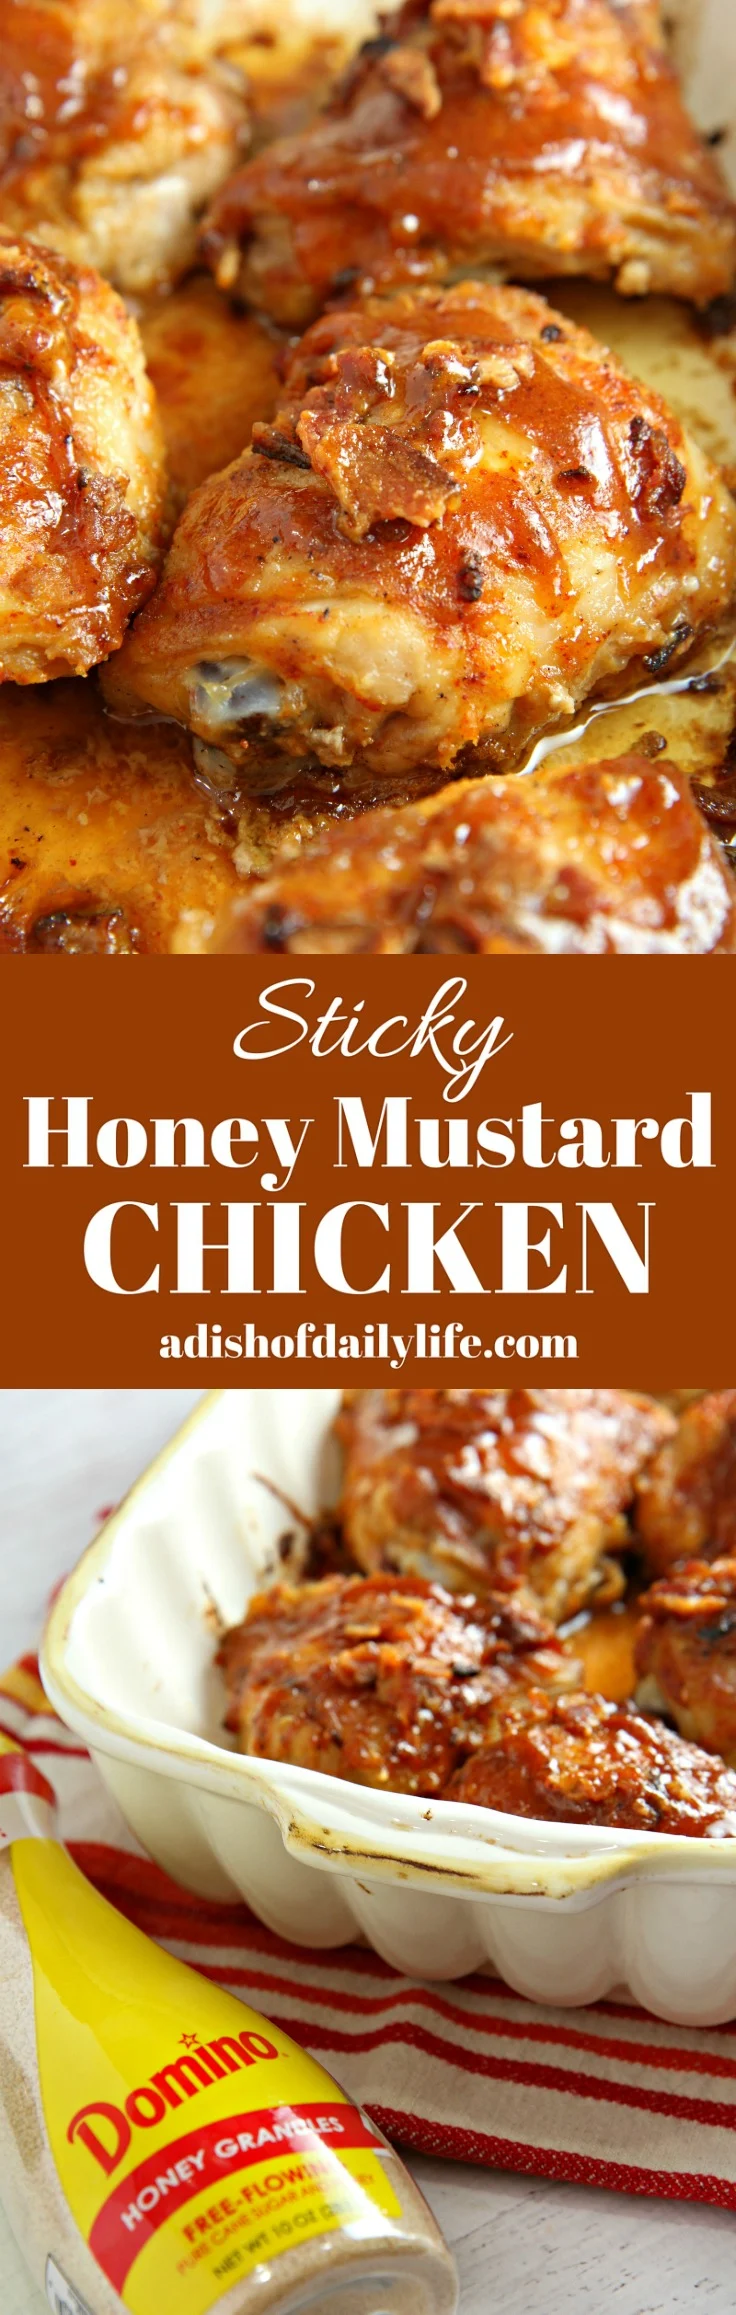 Easy Sticky Honey Mustard Chicken...chicken thighs drizzled with a sweet and tangy honey mustard sauce, flavored with bacon and chili powder...oh so delicious! 